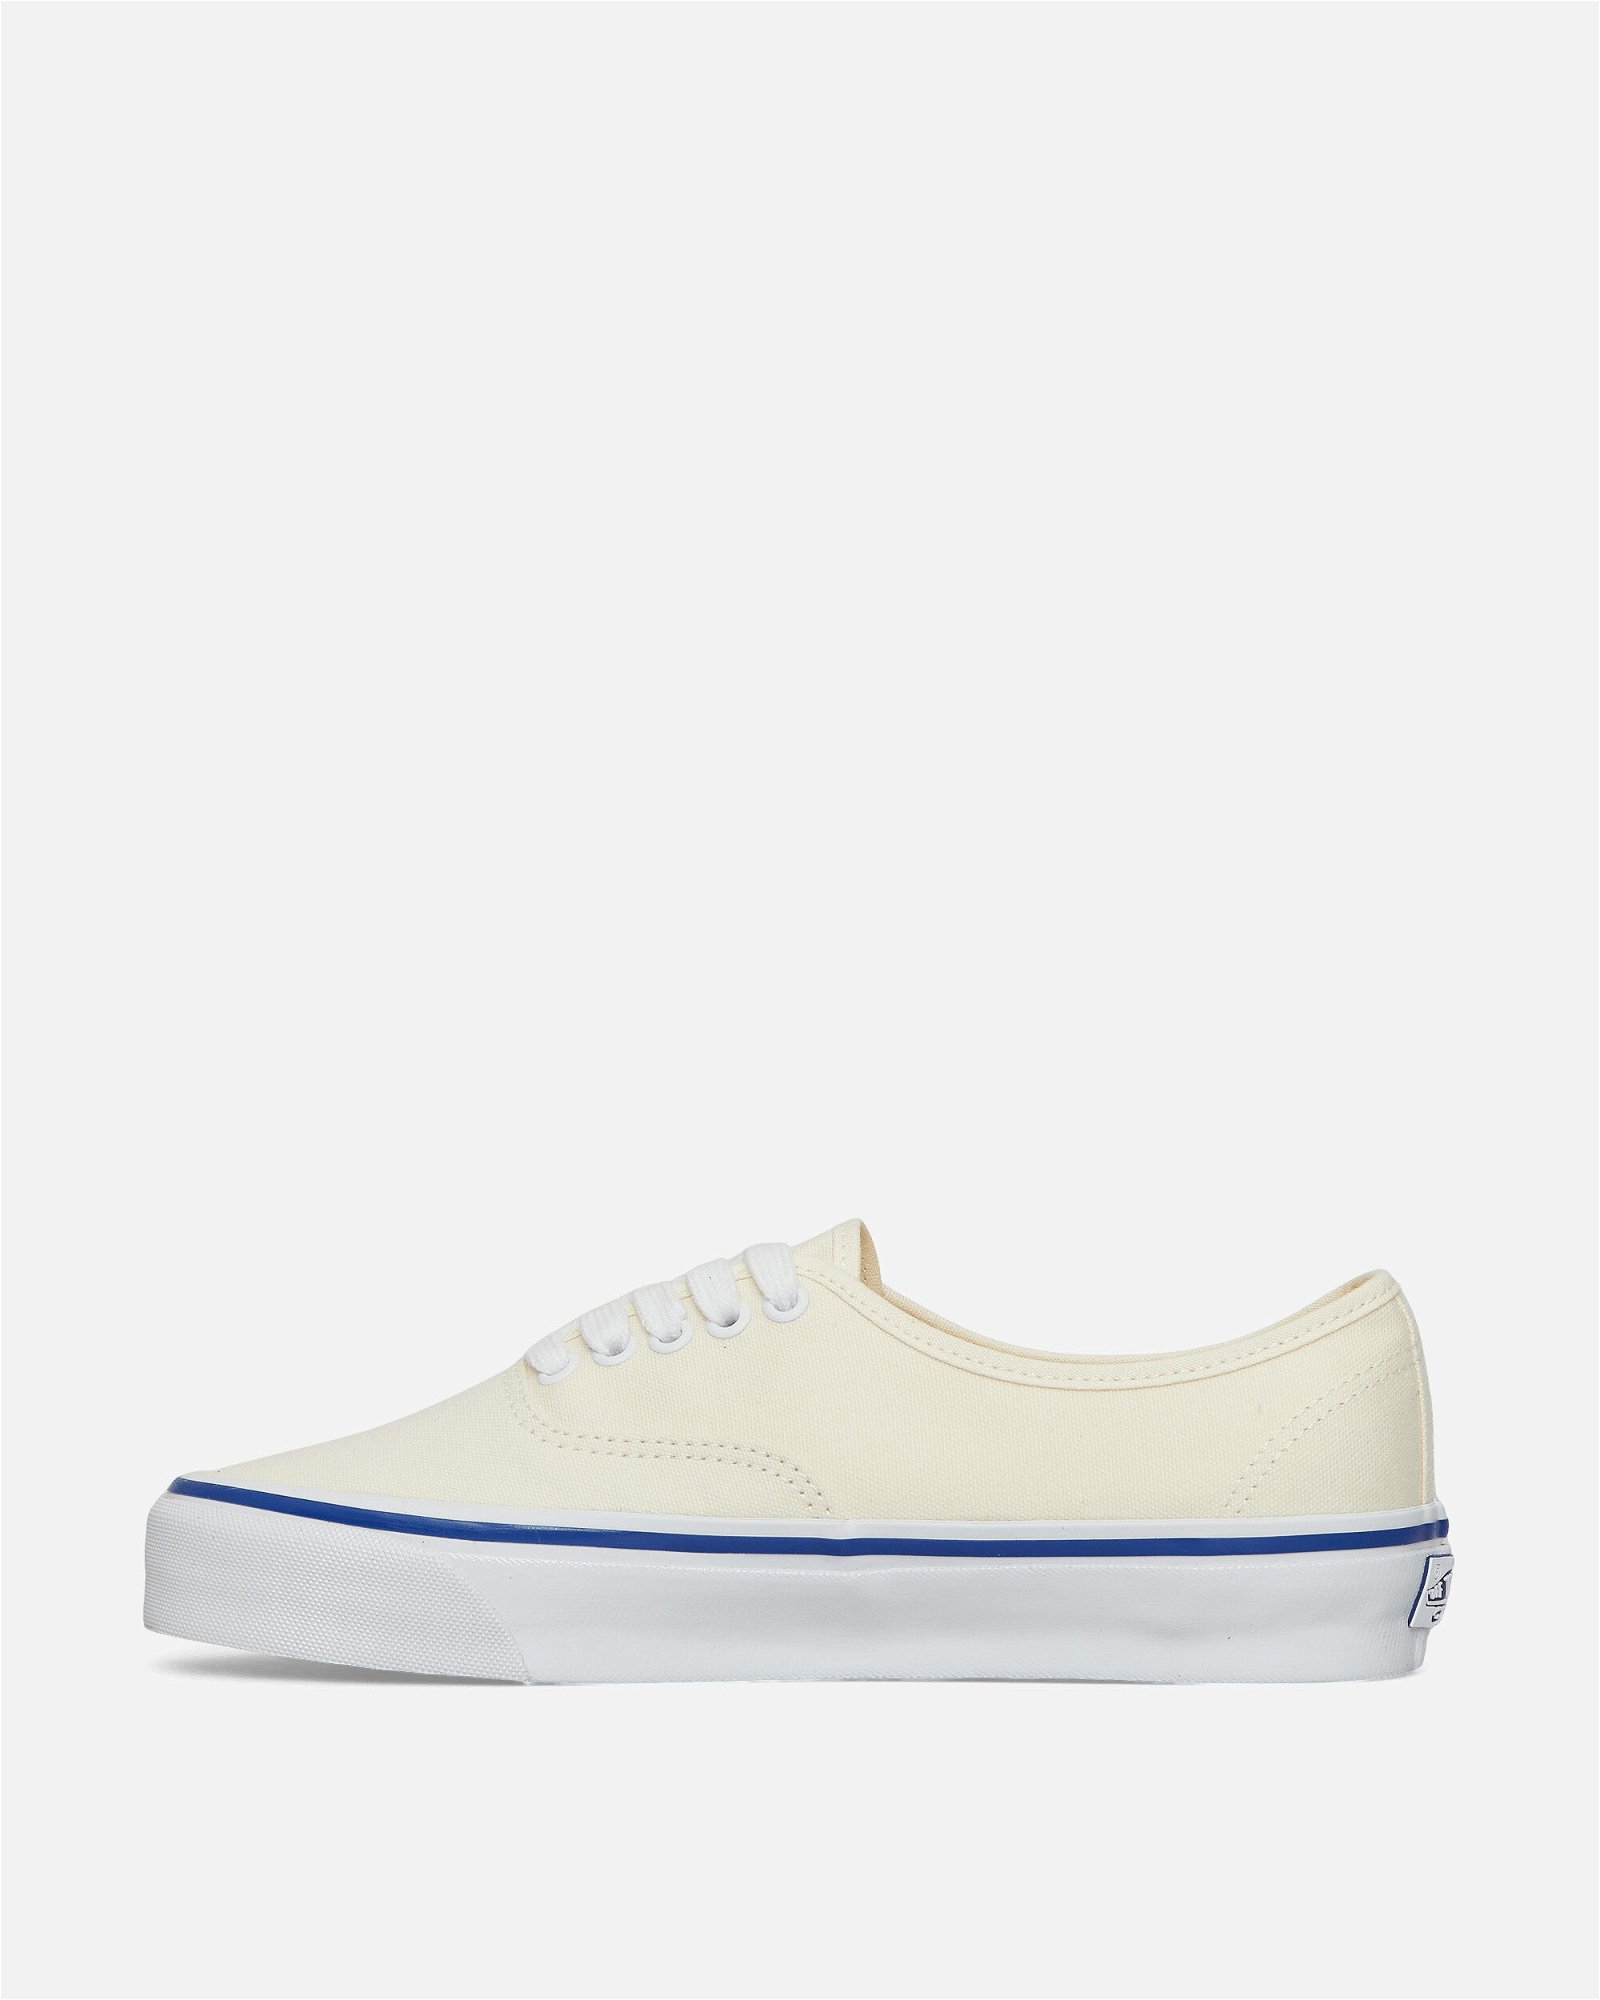 OG Authentic LX Sneakers Off White